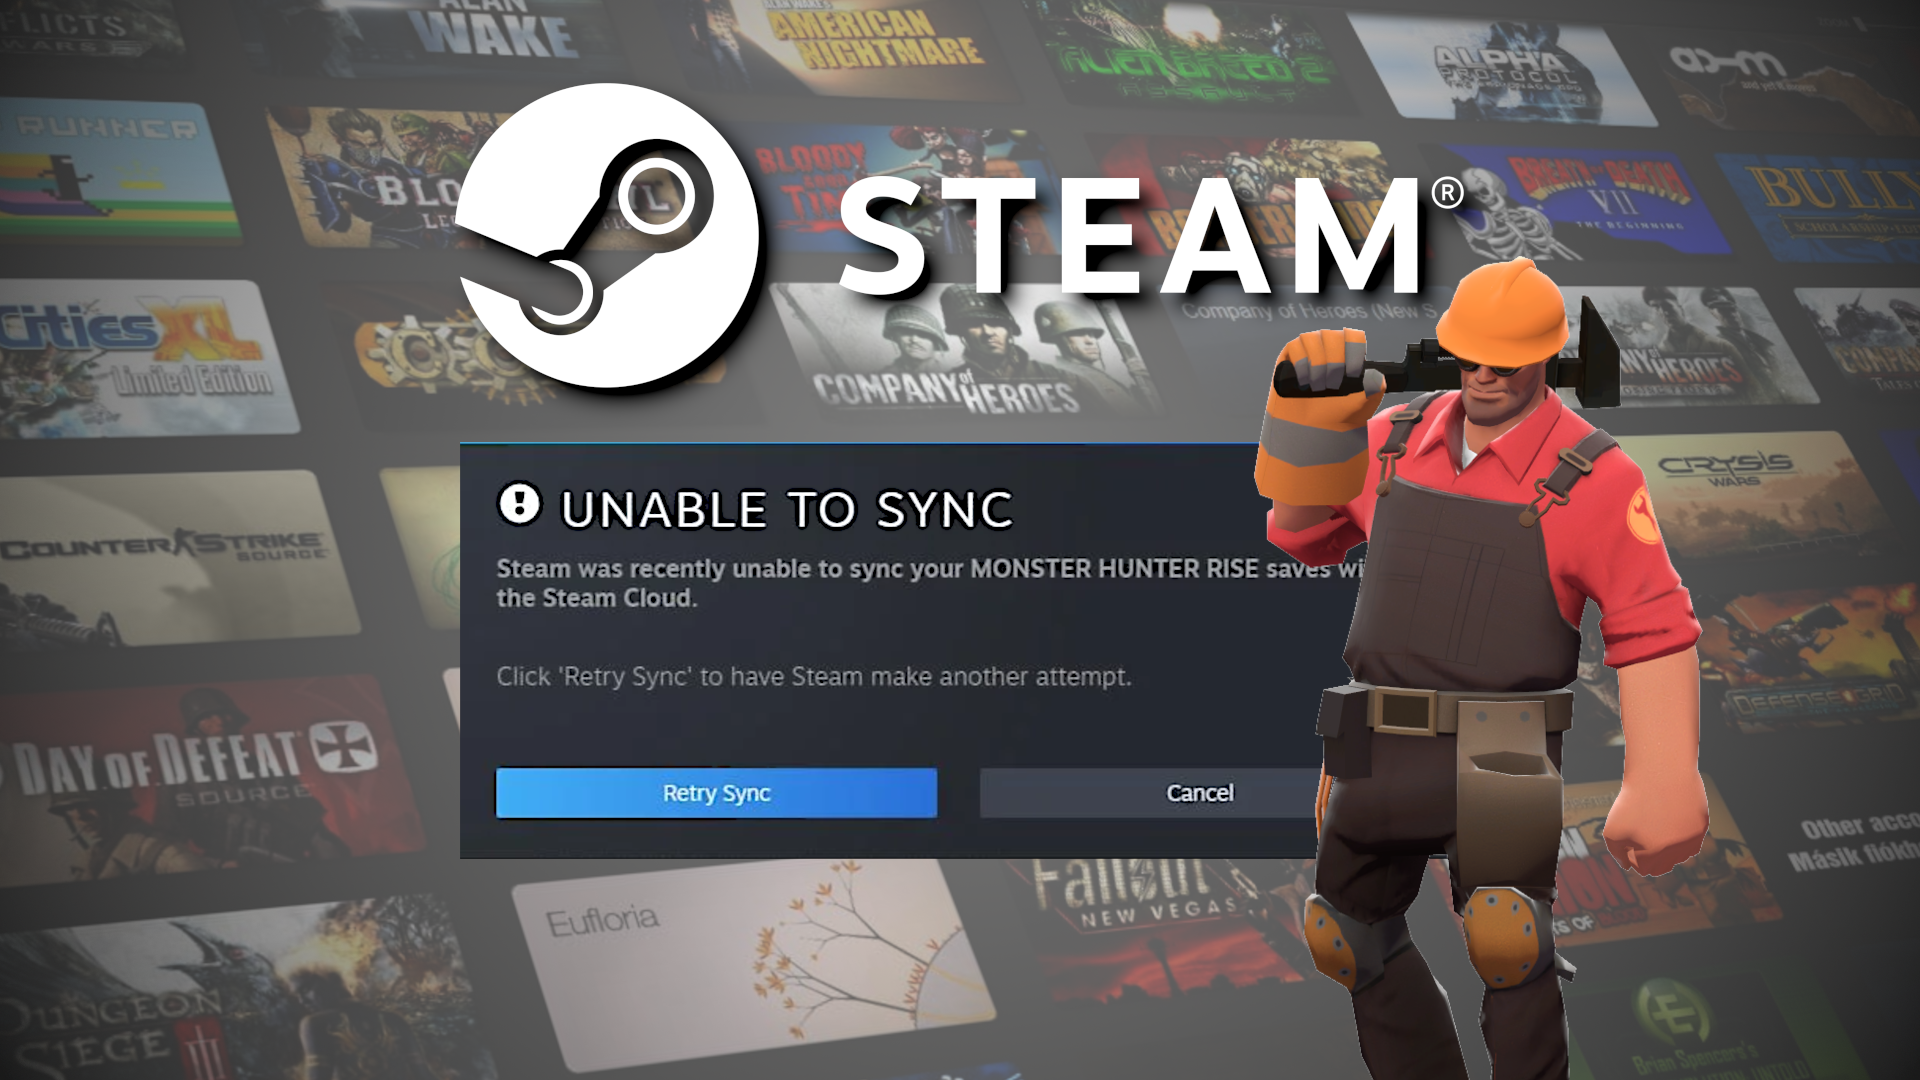 Could not fully initialize steam 7 days фото 48